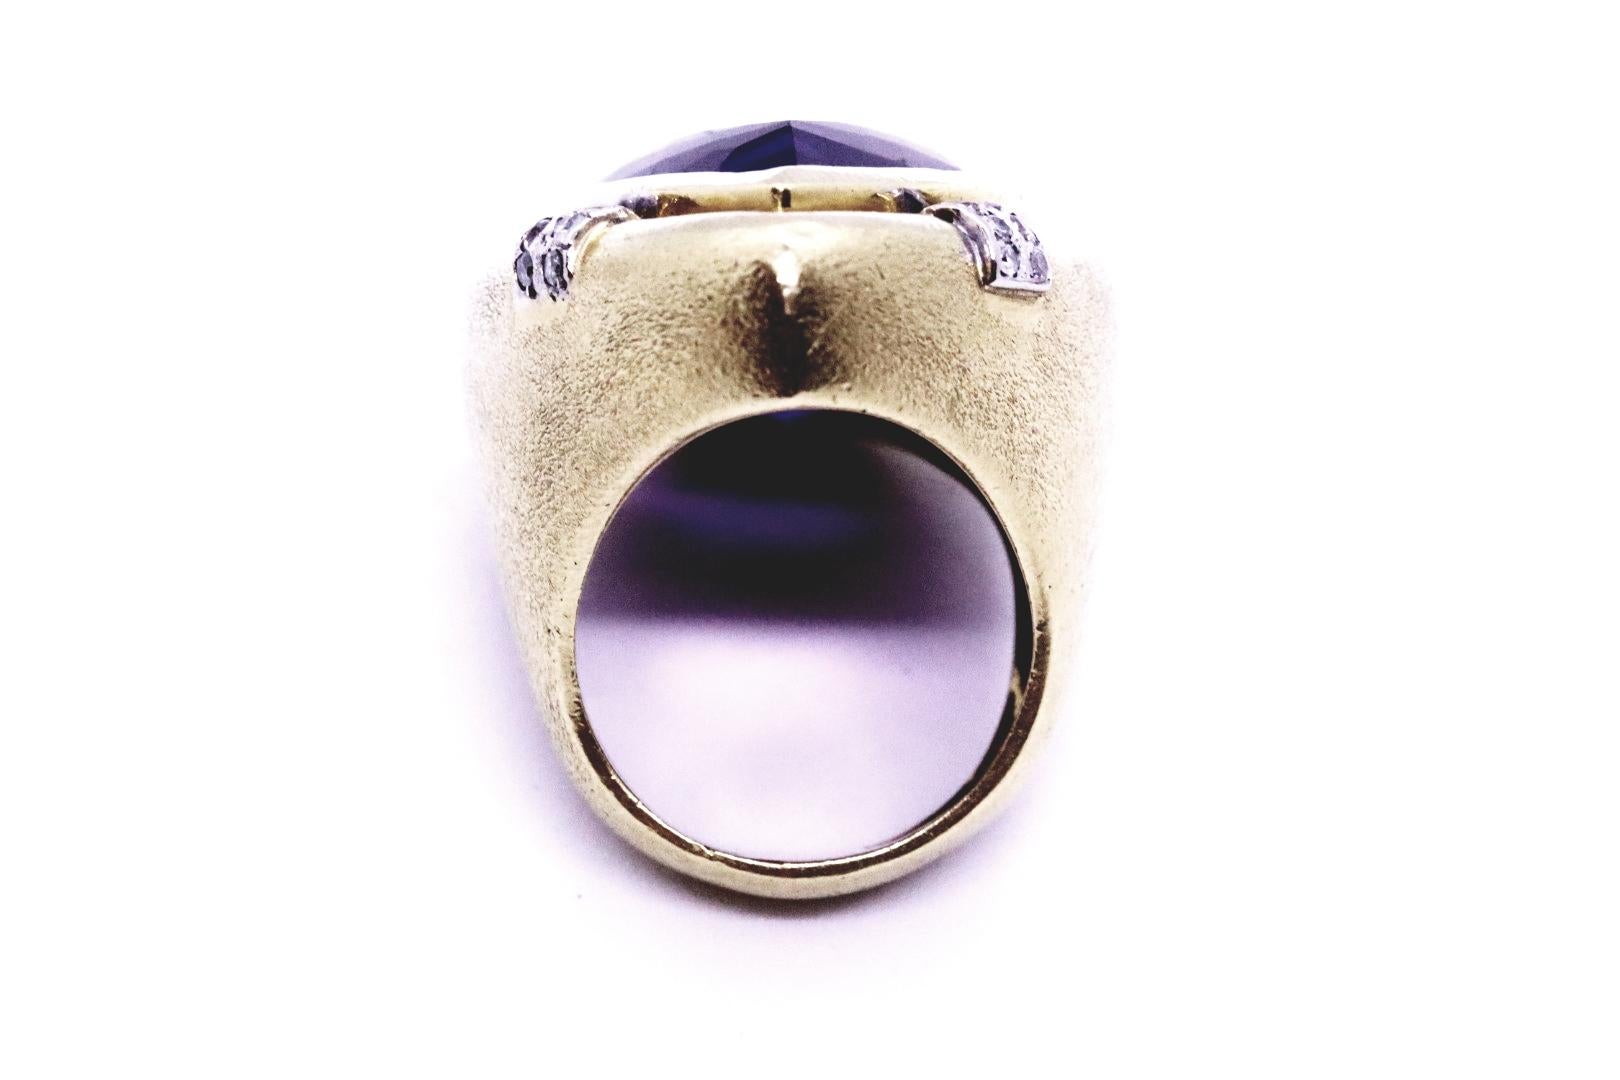 Women's Retro 1970 Oversized Cocktail Ring 18Kt Gold 31.77 Cts in Diamonds and Amethyst